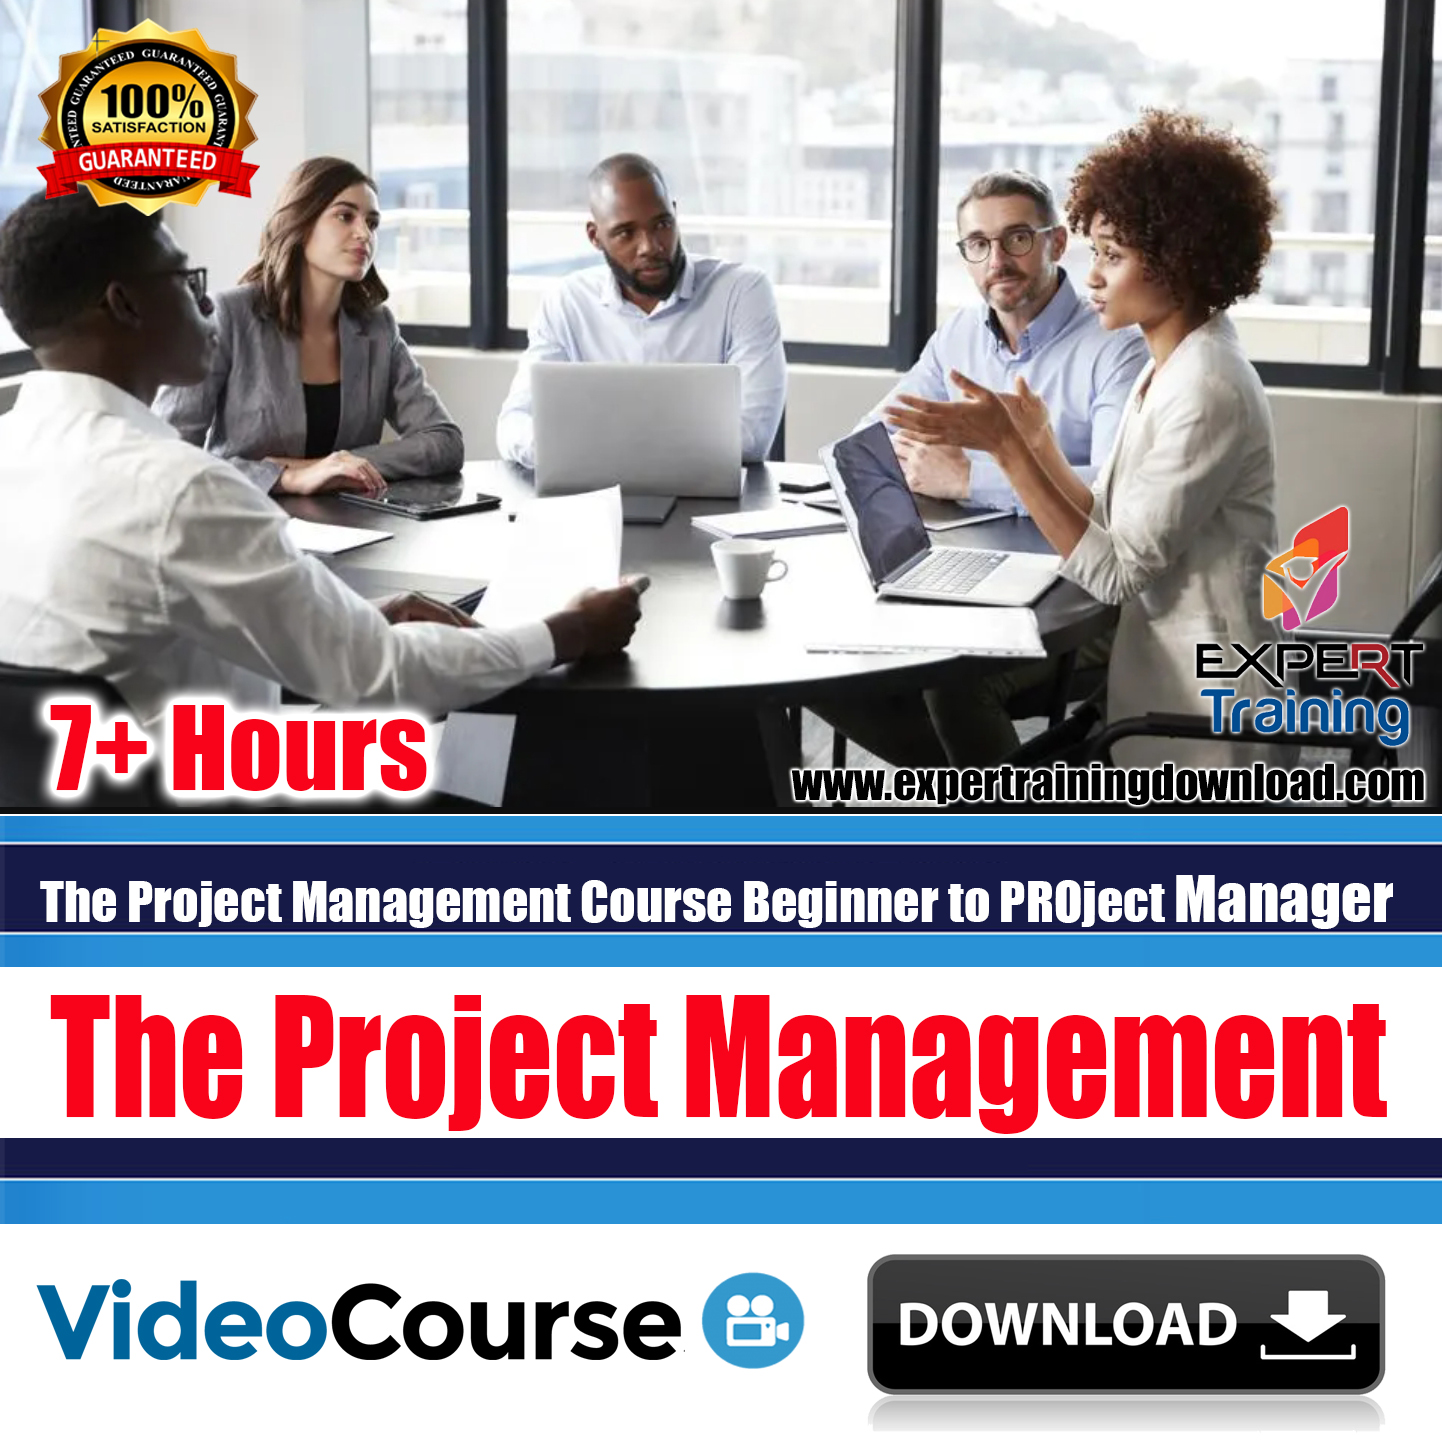 The Project Management Course Beginner to Project Manager